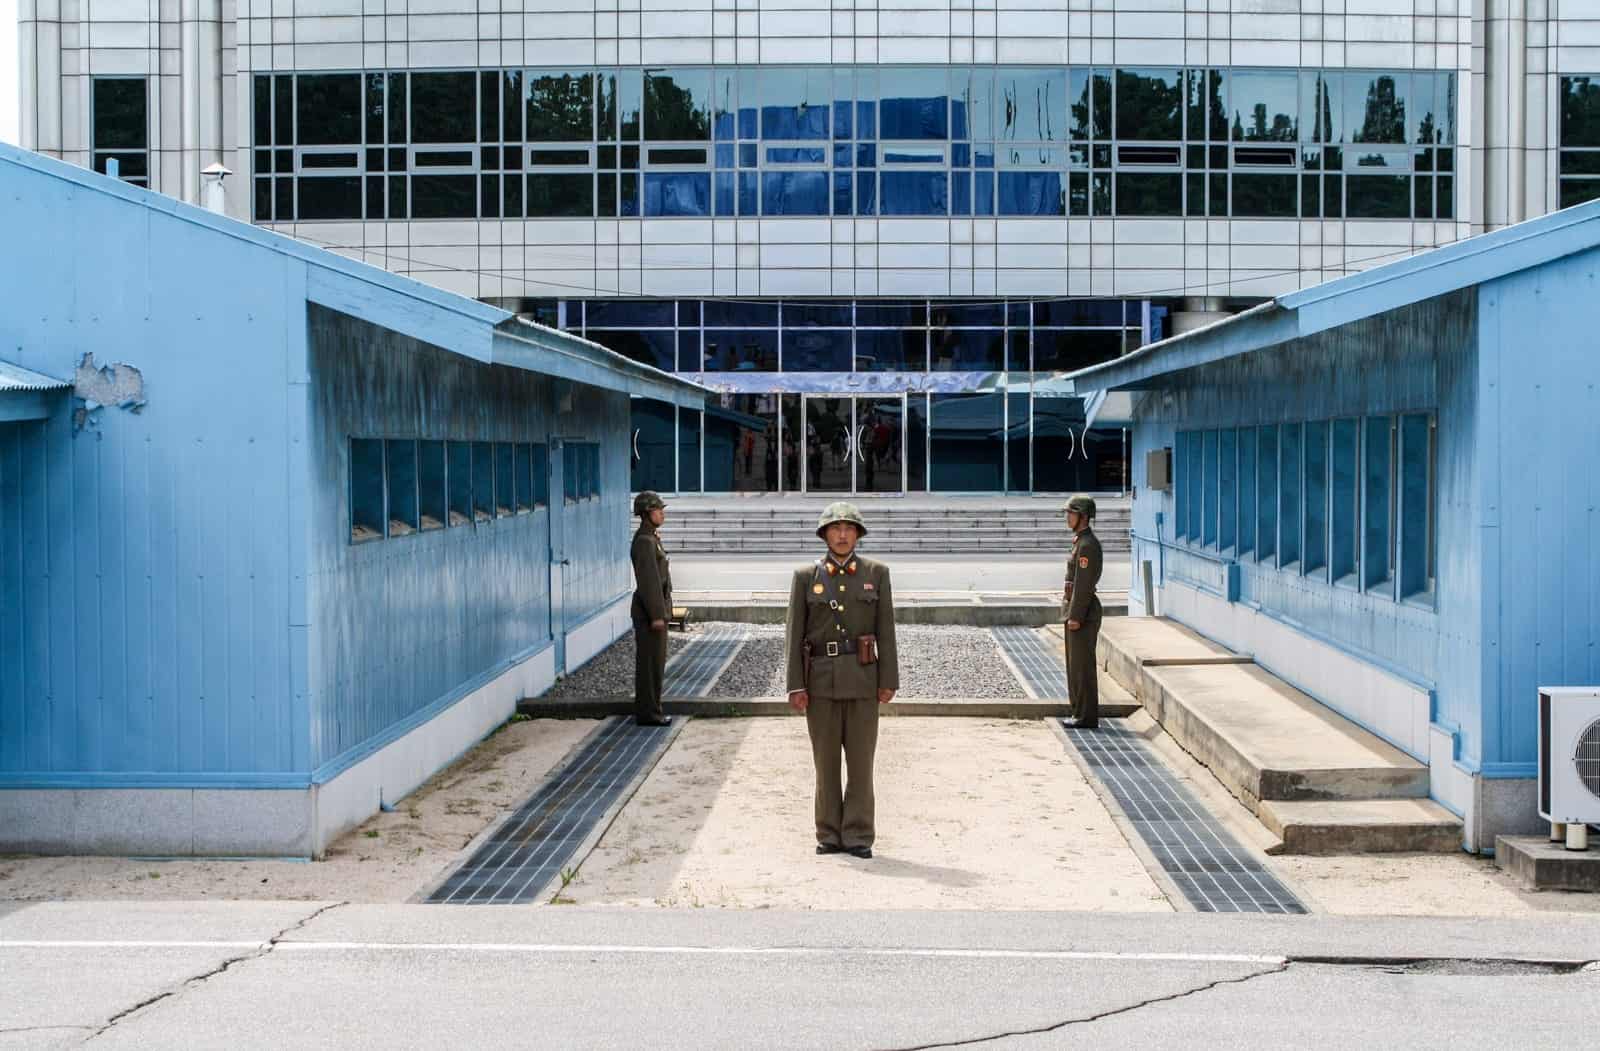 Three North Korean guards in green uniform stand between two blue huts on the North South Korean border at the DMZ demiliterized zone on a DMZ tour.